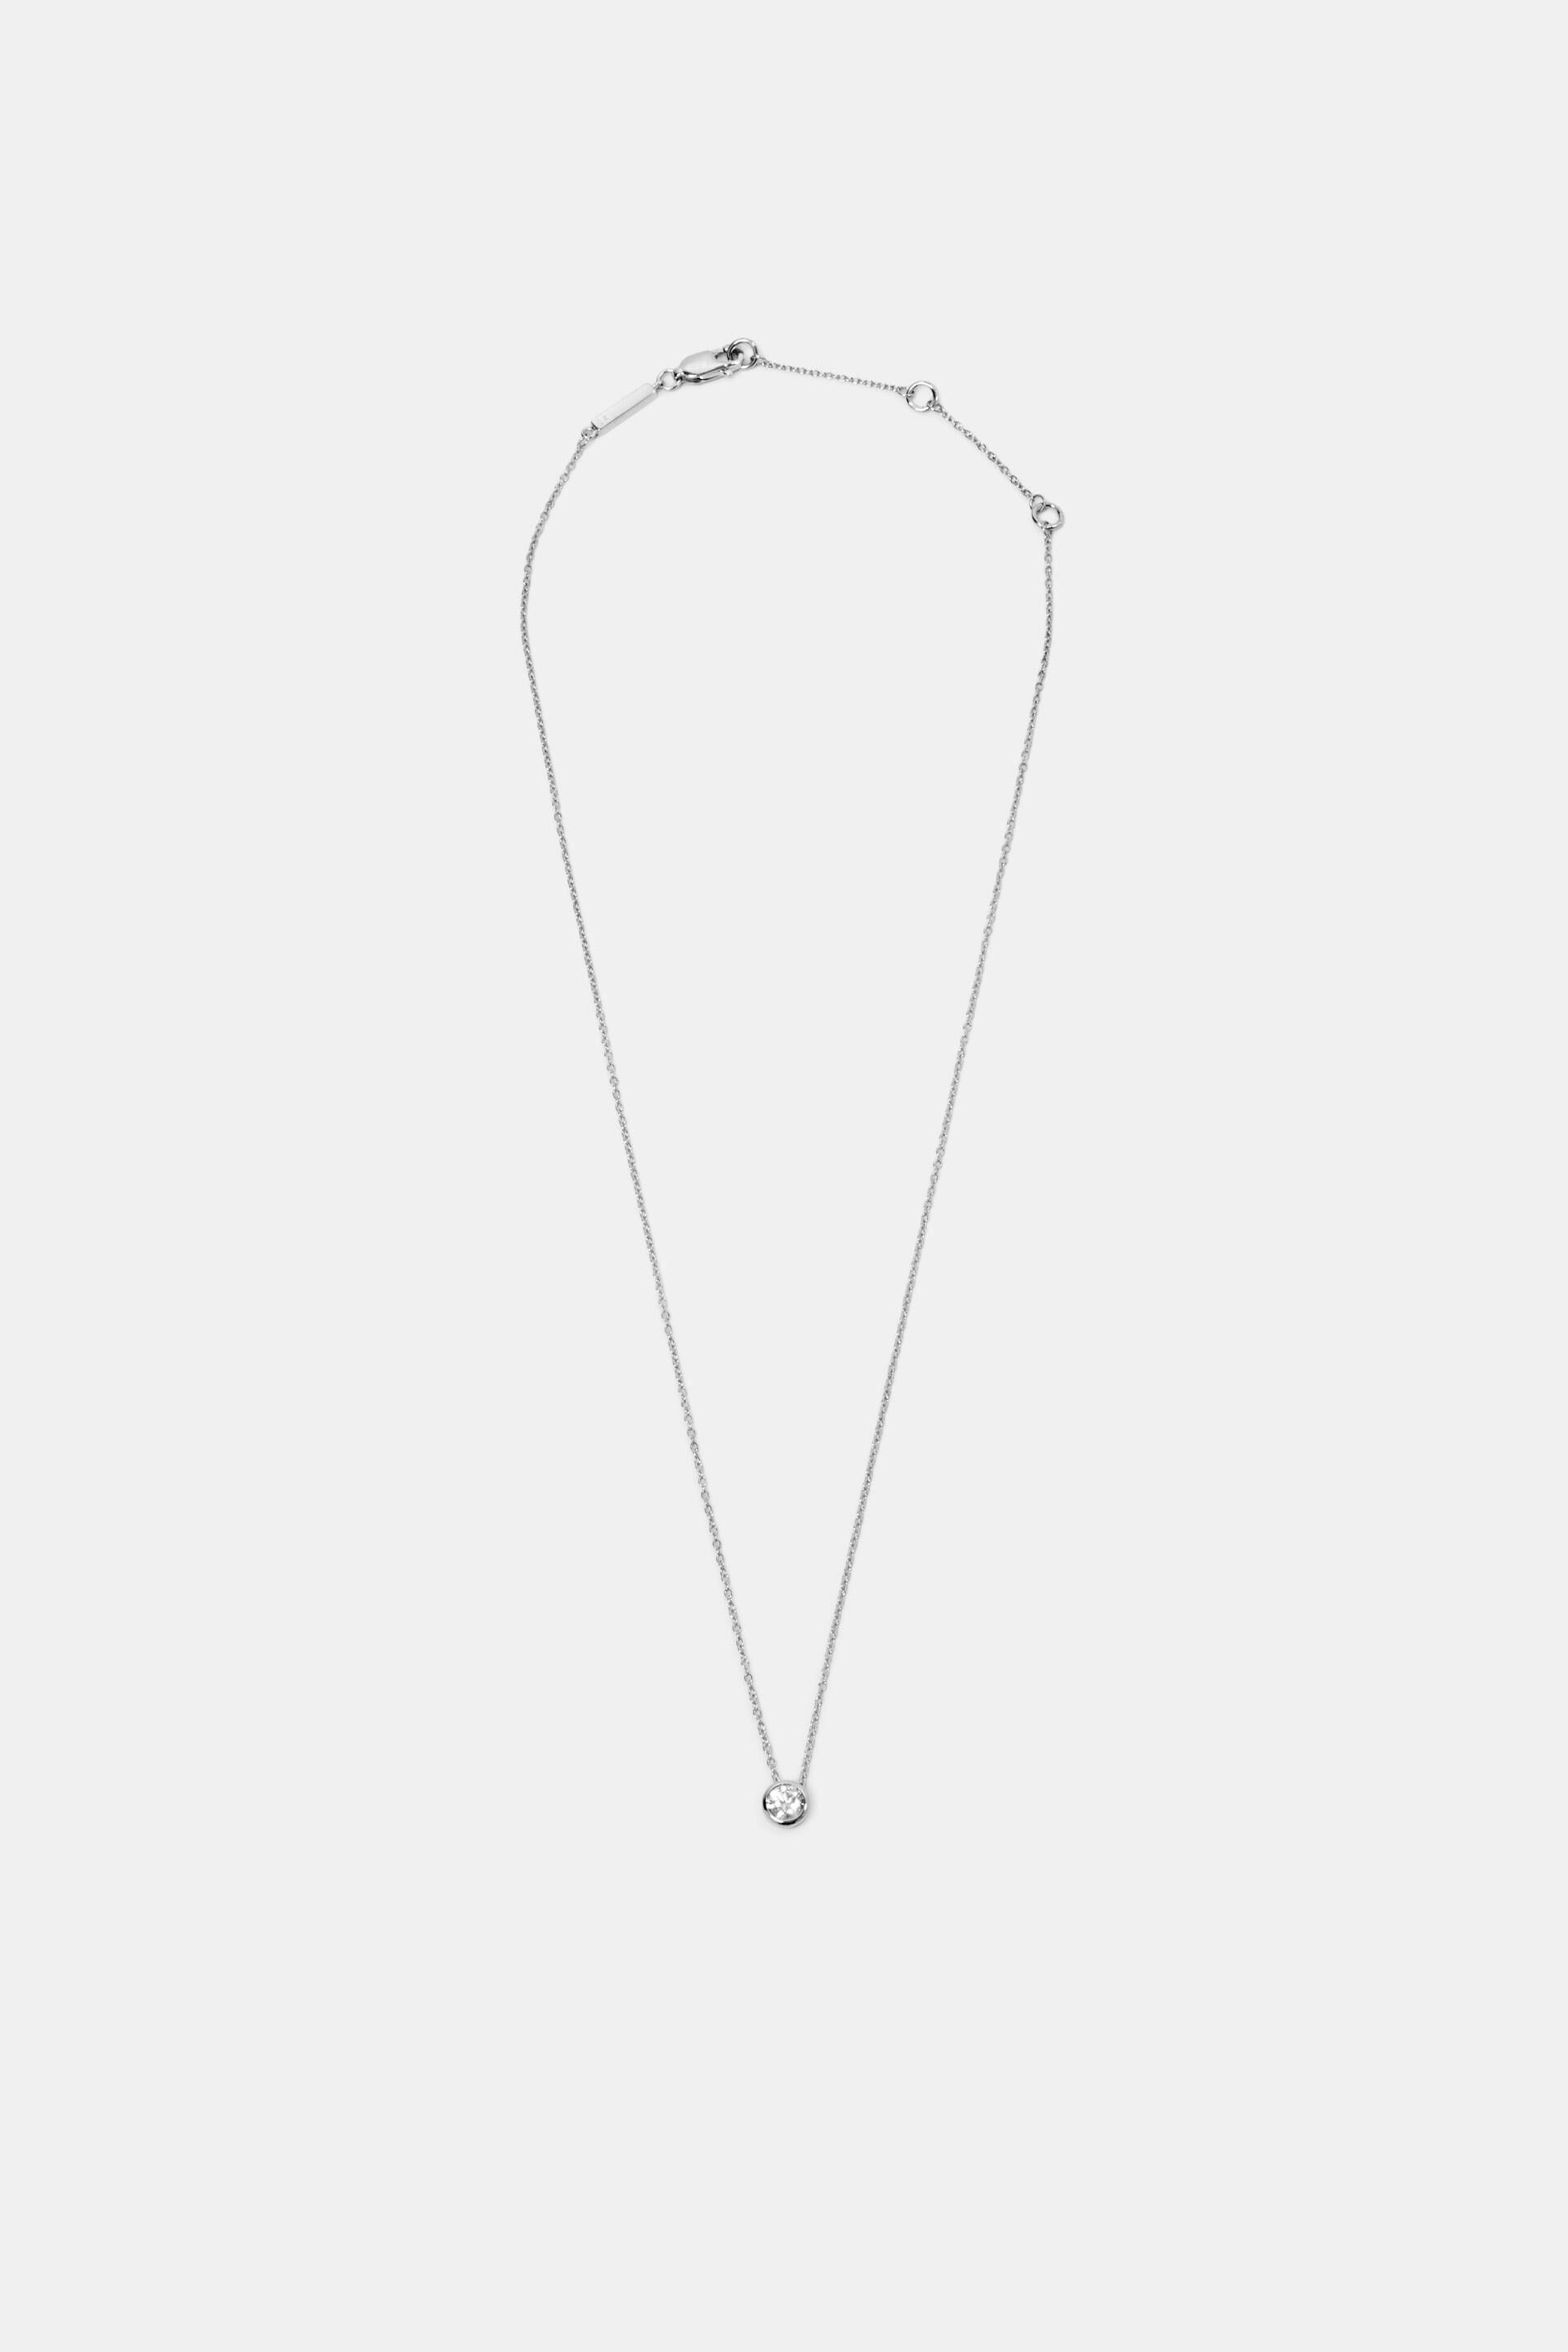 Esprit zirconia, Necklace with silver sterling